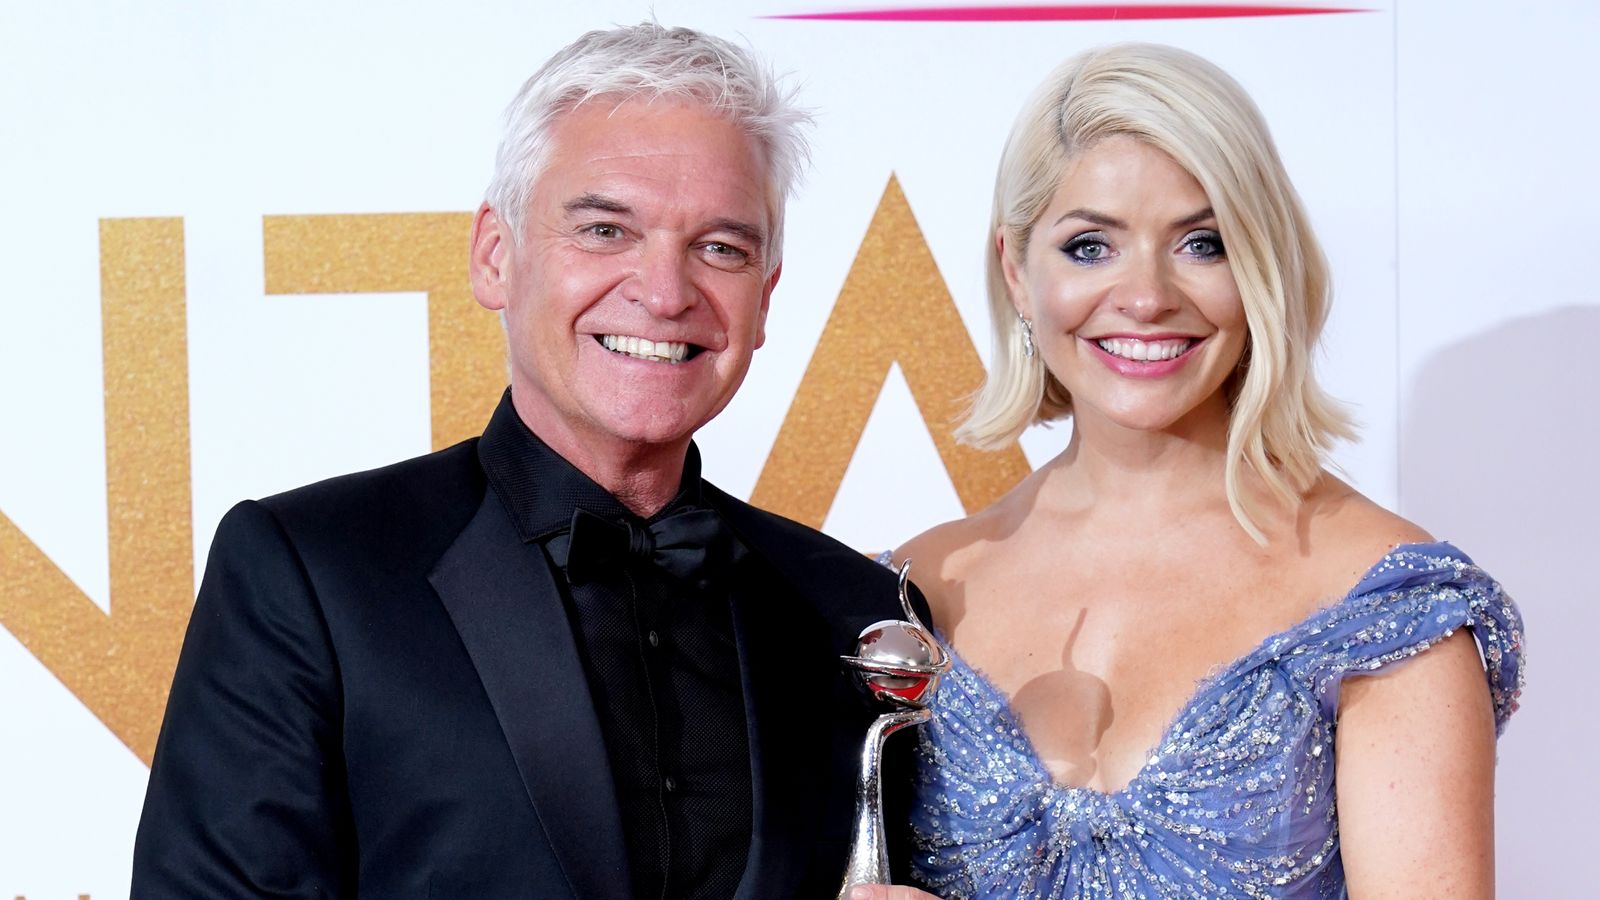 This Morning: ITV reveals replacements for Phillip Schofield and Holly Willoughby